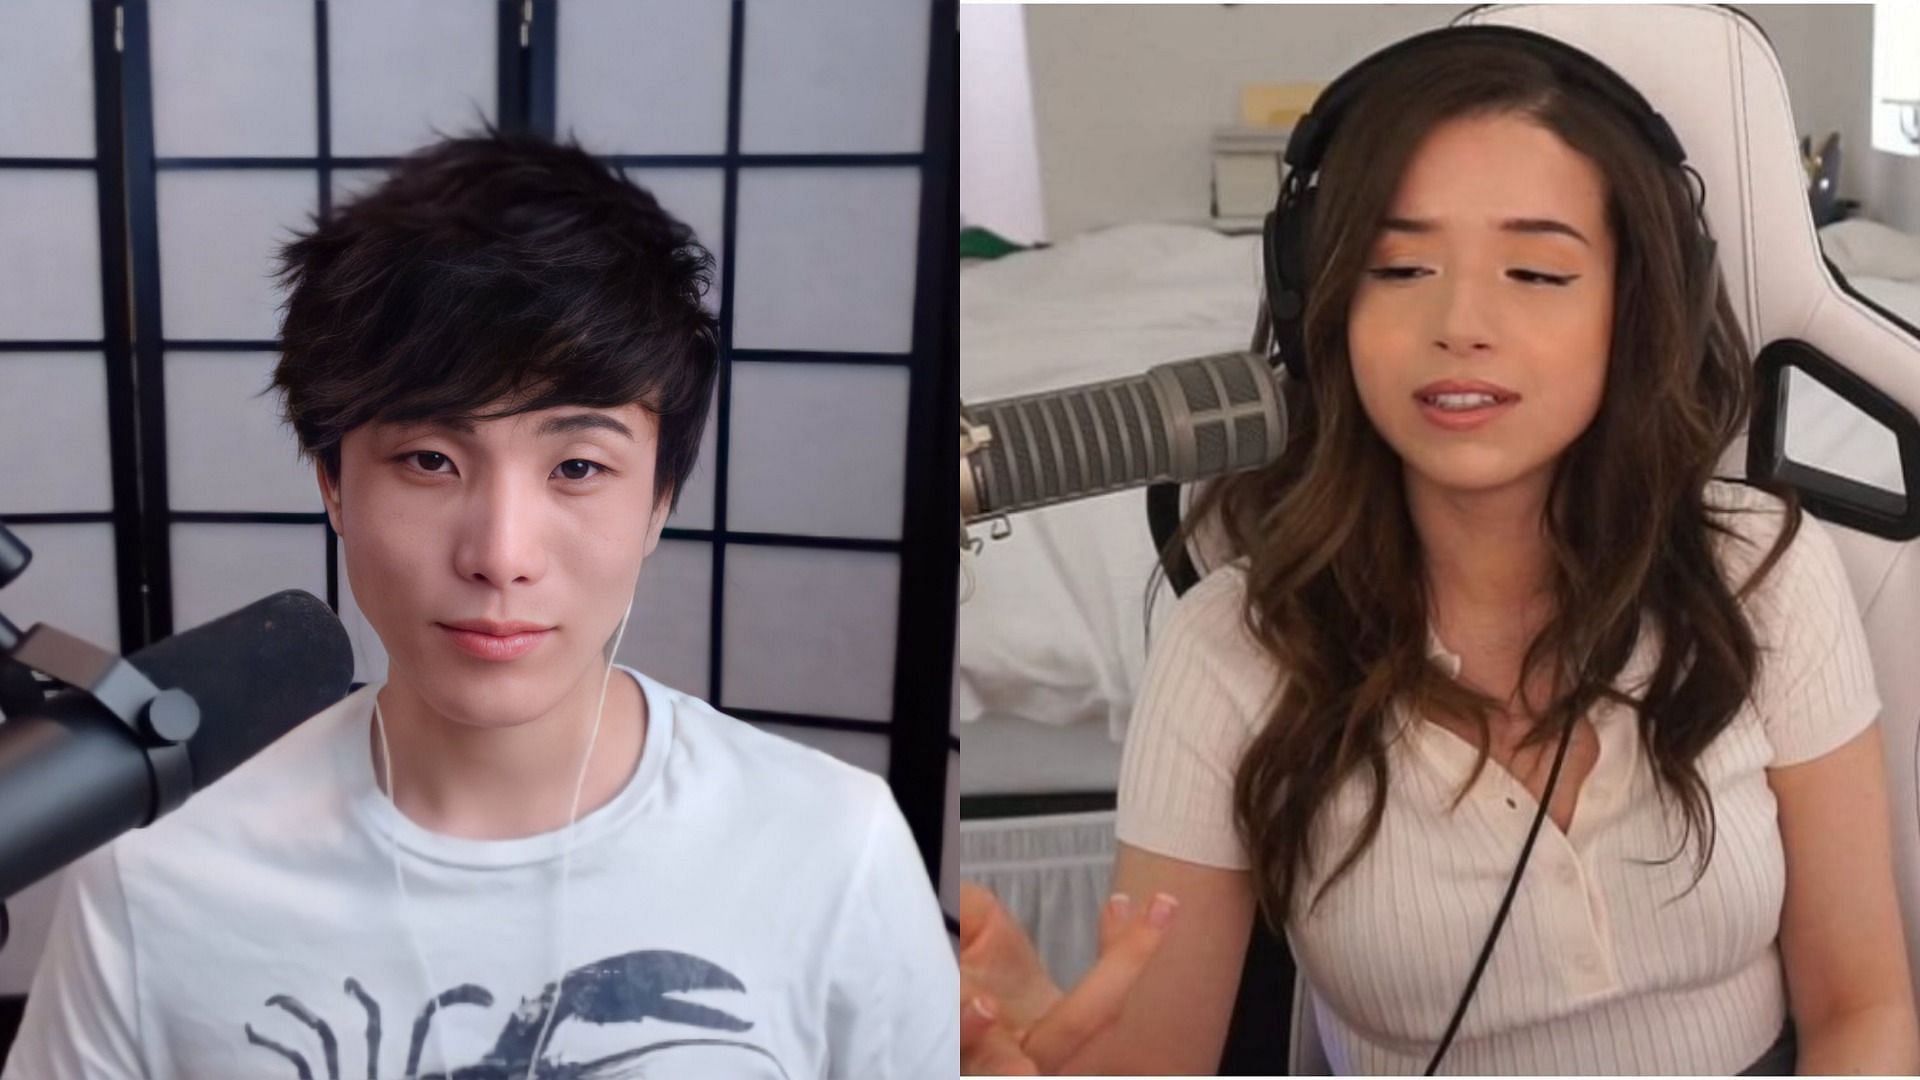 Sykkuno defends Pokimane after she gets banned from Twitch (Image via Wikitubia and Sportskeeda)